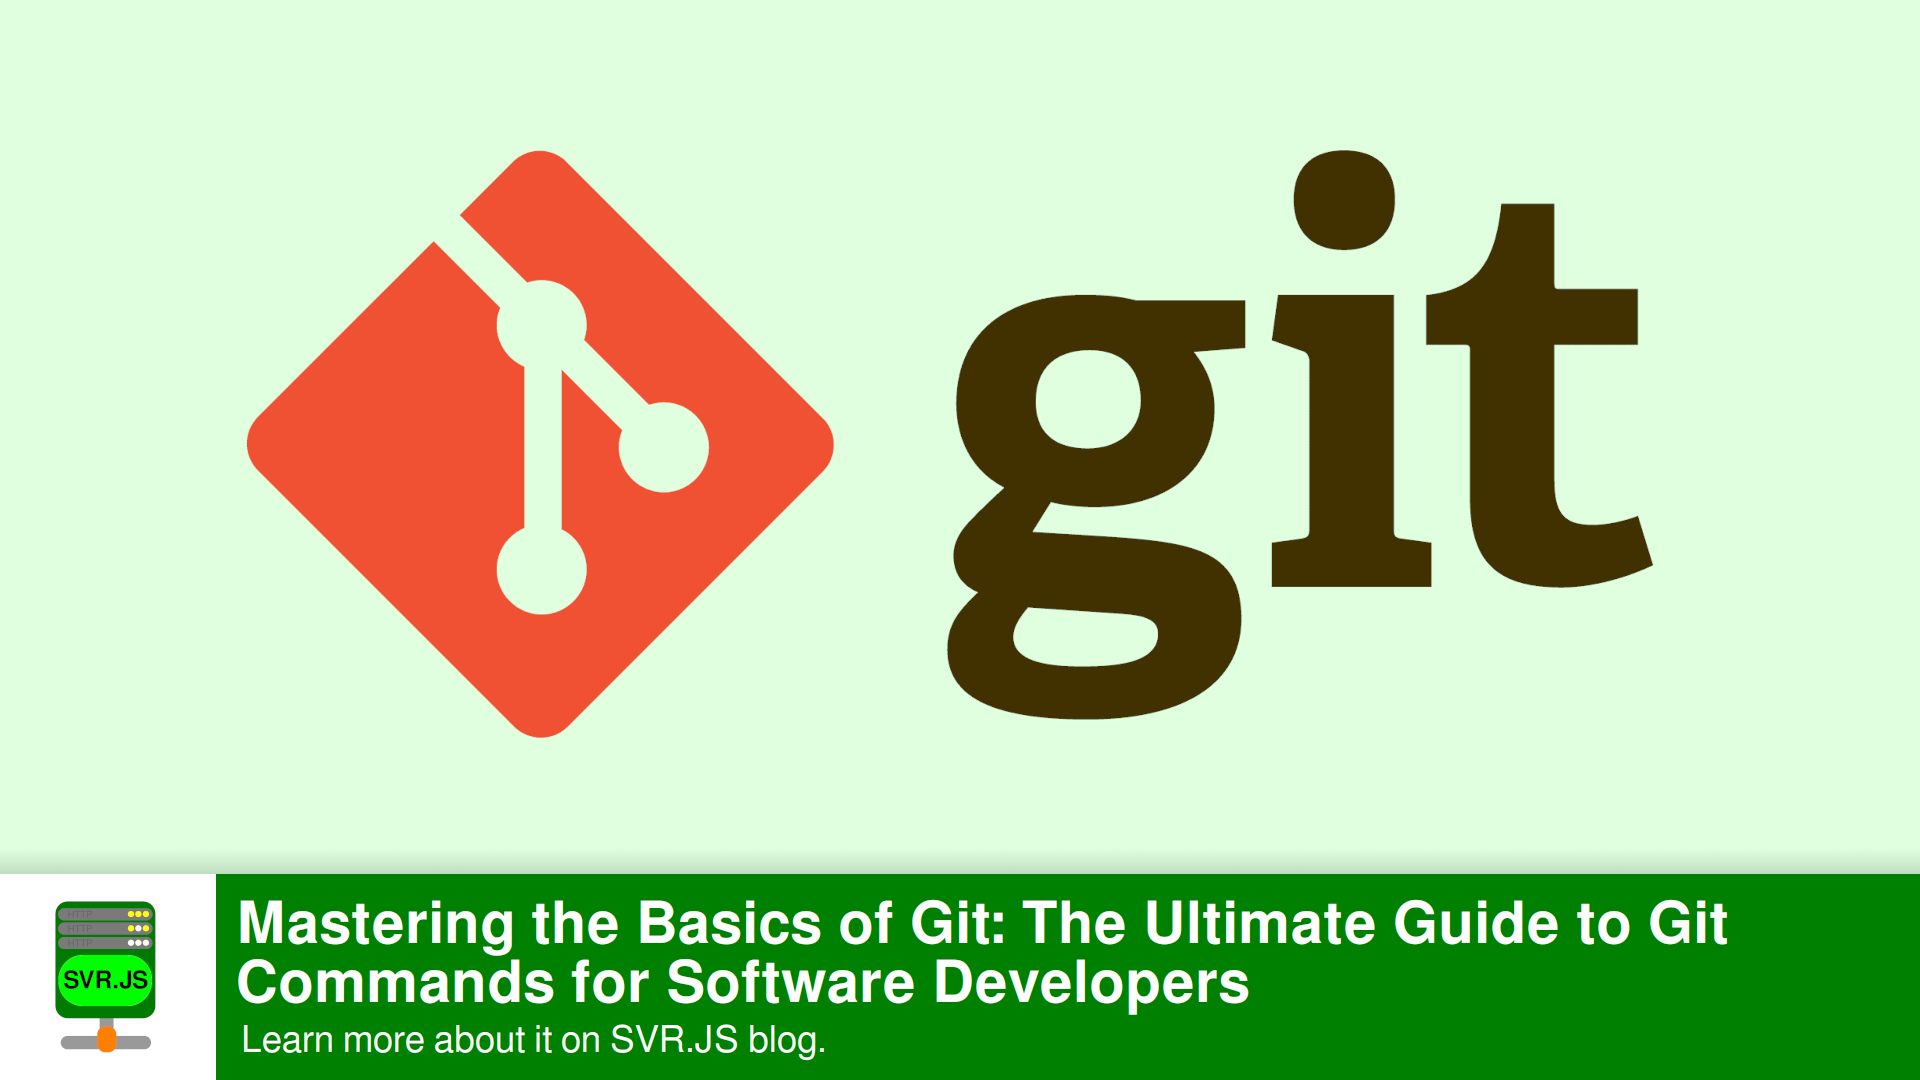 Mastering the Basics of Git: The Ultimate Guide to Git Commands for Software Developers